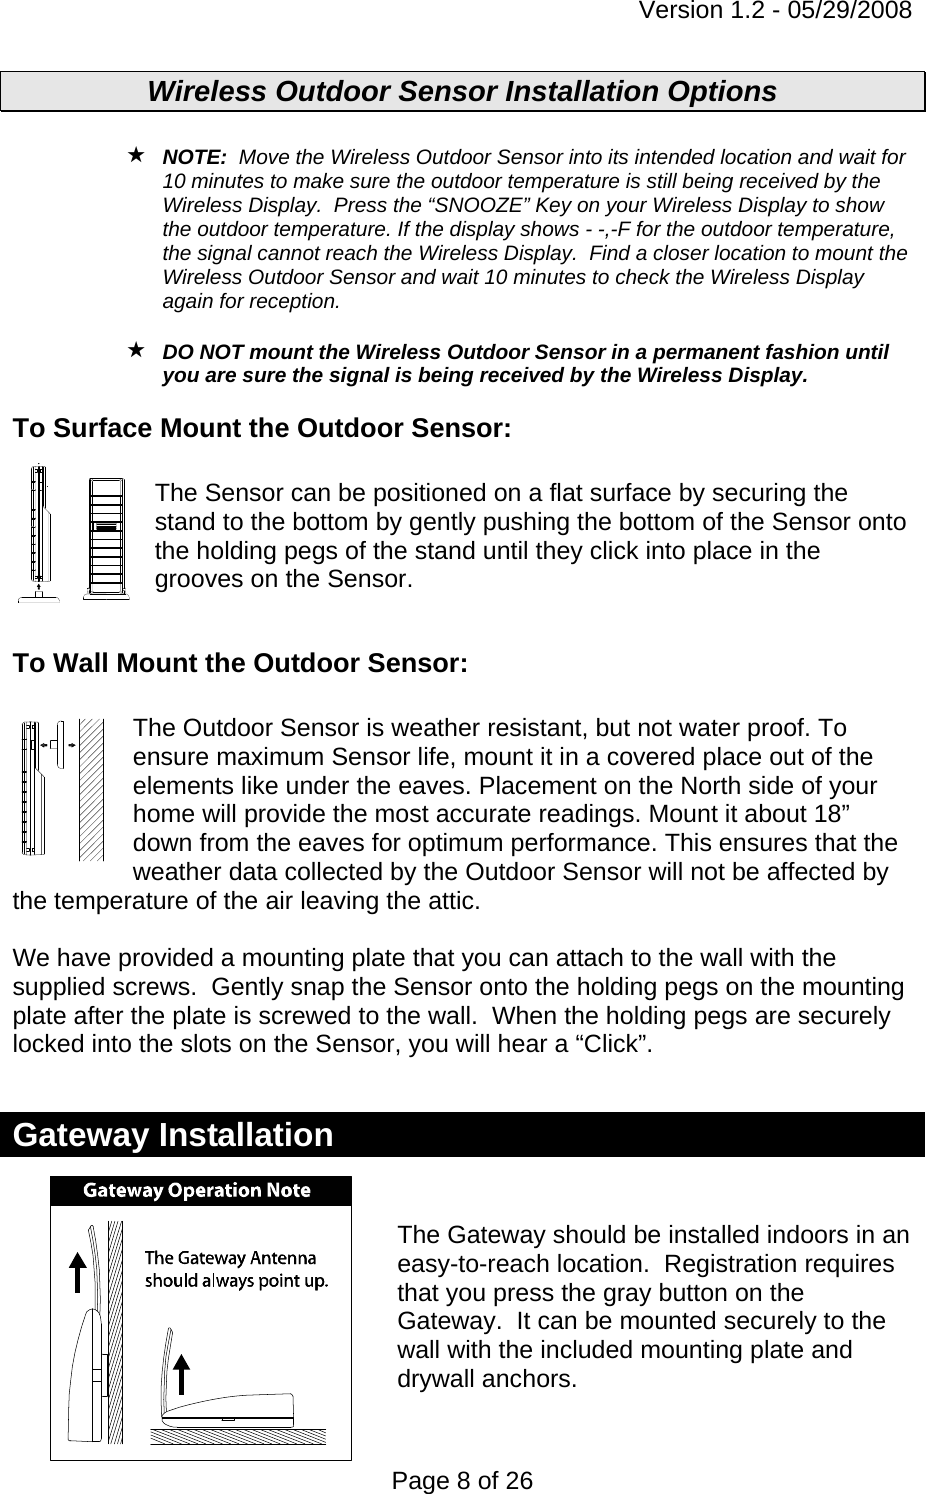 Version 1.2 - 05/29/2008 Page 8 of 26 Wireless Outdoor Sensor Installation Options   NOTE:  Move the Wireless Outdoor Sensor into its intended location and wait for 10 minutes to make sure the outdoor temperature is still being received by the Wireless Display.  Press the “SNOOZE” Key on your Wireless Display to show the outdoor temperature. If the display shows - -,-F for the outdoor temperature, the signal cannot reach the Wireless Display.  Find a closer location to mount the Wireless Outdoor Sensor and wait 10 minutes to check the Wireless Display again for reception.    DO NOT mount the Wireless Outdoor Sensor in a permanent fashion until you are sure the signal is being received by the Wireless Display. To Surface Mount the Outdoor Sensor:  The Sensor can be positioned on a flat surface by securing the stand to the bottom by gently pushing the bottom of the Sensor onto the holding pegs of the stand until they click into place in the grooves on the Sensor.  To Wall Mount the Outdoor Sensor:  The Outdoor Sensor is weather resistant, but not water proof. To ensure maximum Sensor life, mount it in a covered place out of the elements like under the eaves. Placement on the North side of your home will provide the most accurate readings. Mount it about 18” down from the eaves for optimum performance. This ensures that the weather data collected by the Outdoor Sensor will not be affected by the temperature of the air leaving the attic.  We have provided a mounting plate that you can attach to the wall with the supplied screws.  Gently snap the Sensor onto the holding pegs on the mounting plate after the plate is screwed to the wall.  When the holding pegs are securely locked into the slots on the Sensor, you will hear a “Click”.  Gateway Installation   The Gateway should be installed indoors in an easy-to-reach location.  Registration requires that you press the gray button on the Gateway.  It can be mounted securely to the wall with the included mounting plate and drywall anchors.   